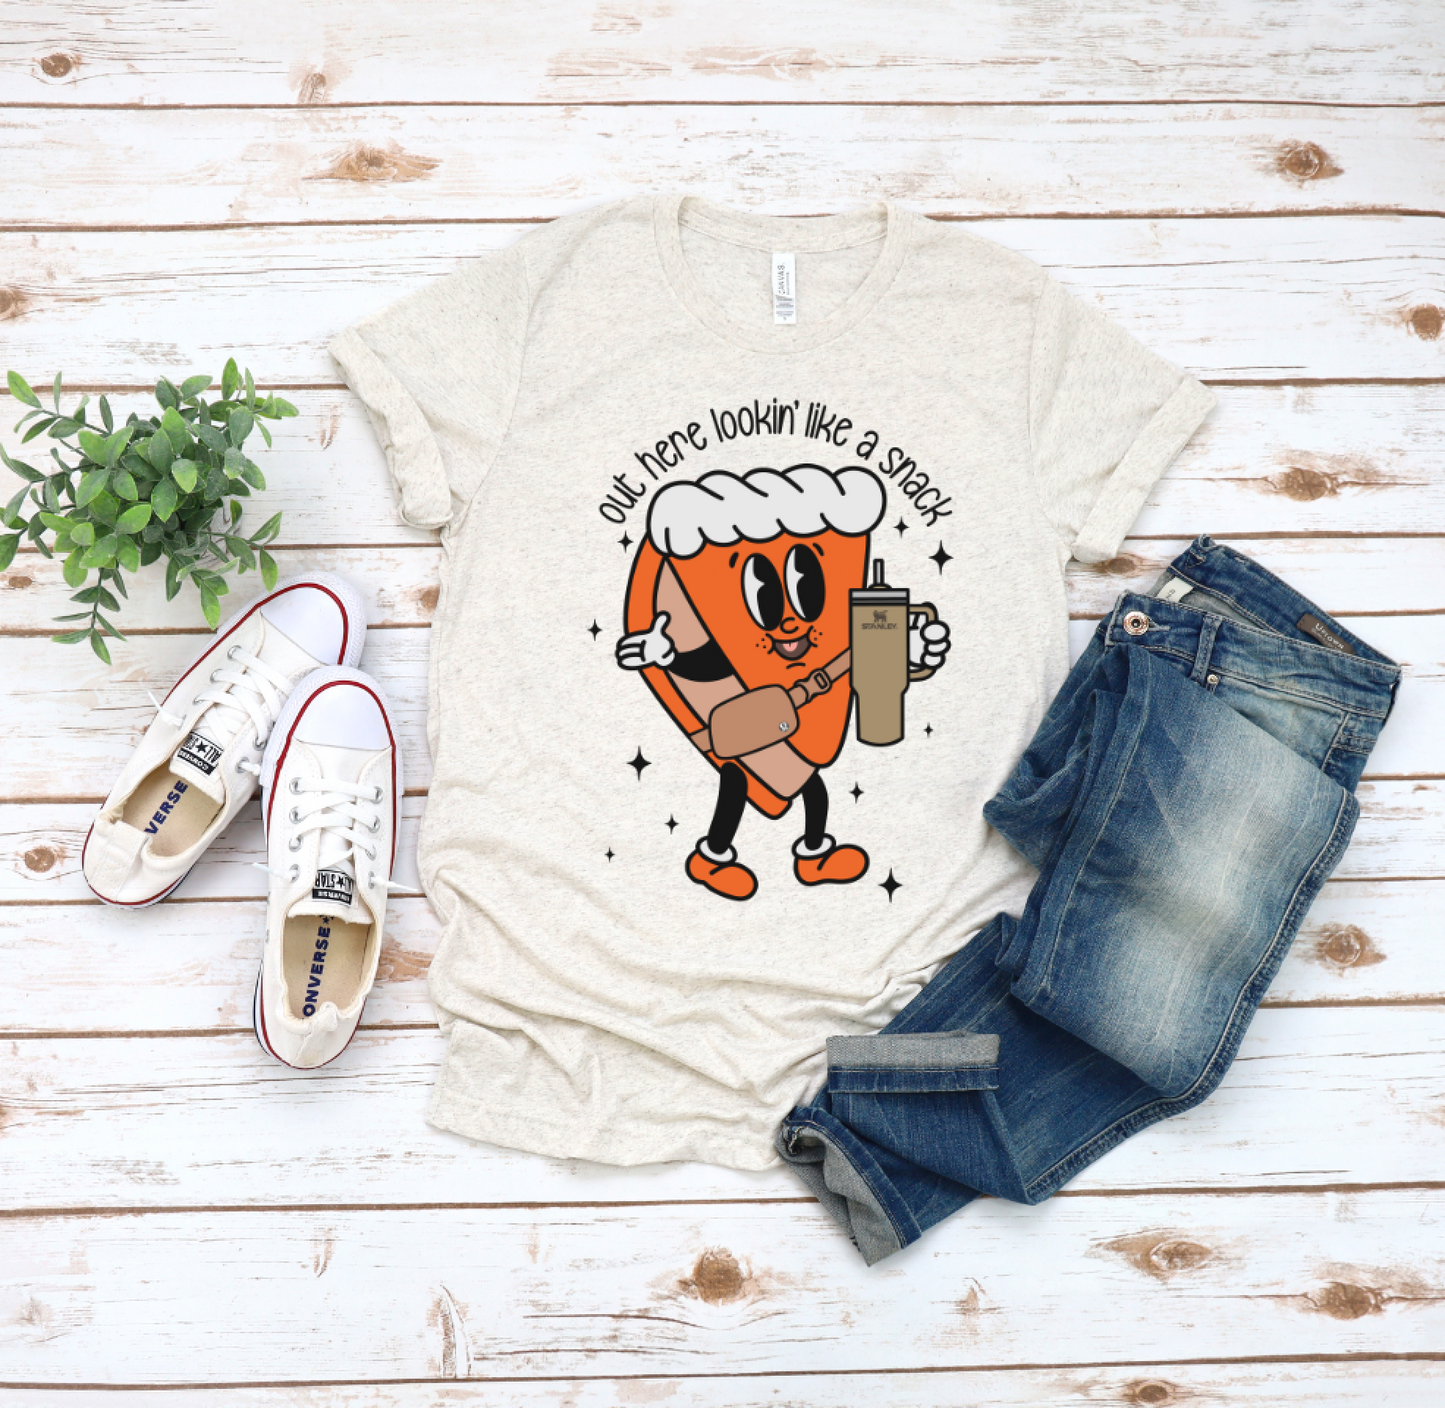 Out Here Looking Like a Snack || Pie Stanley Thanksgiving Printed T-Shirt or Sweatshirt